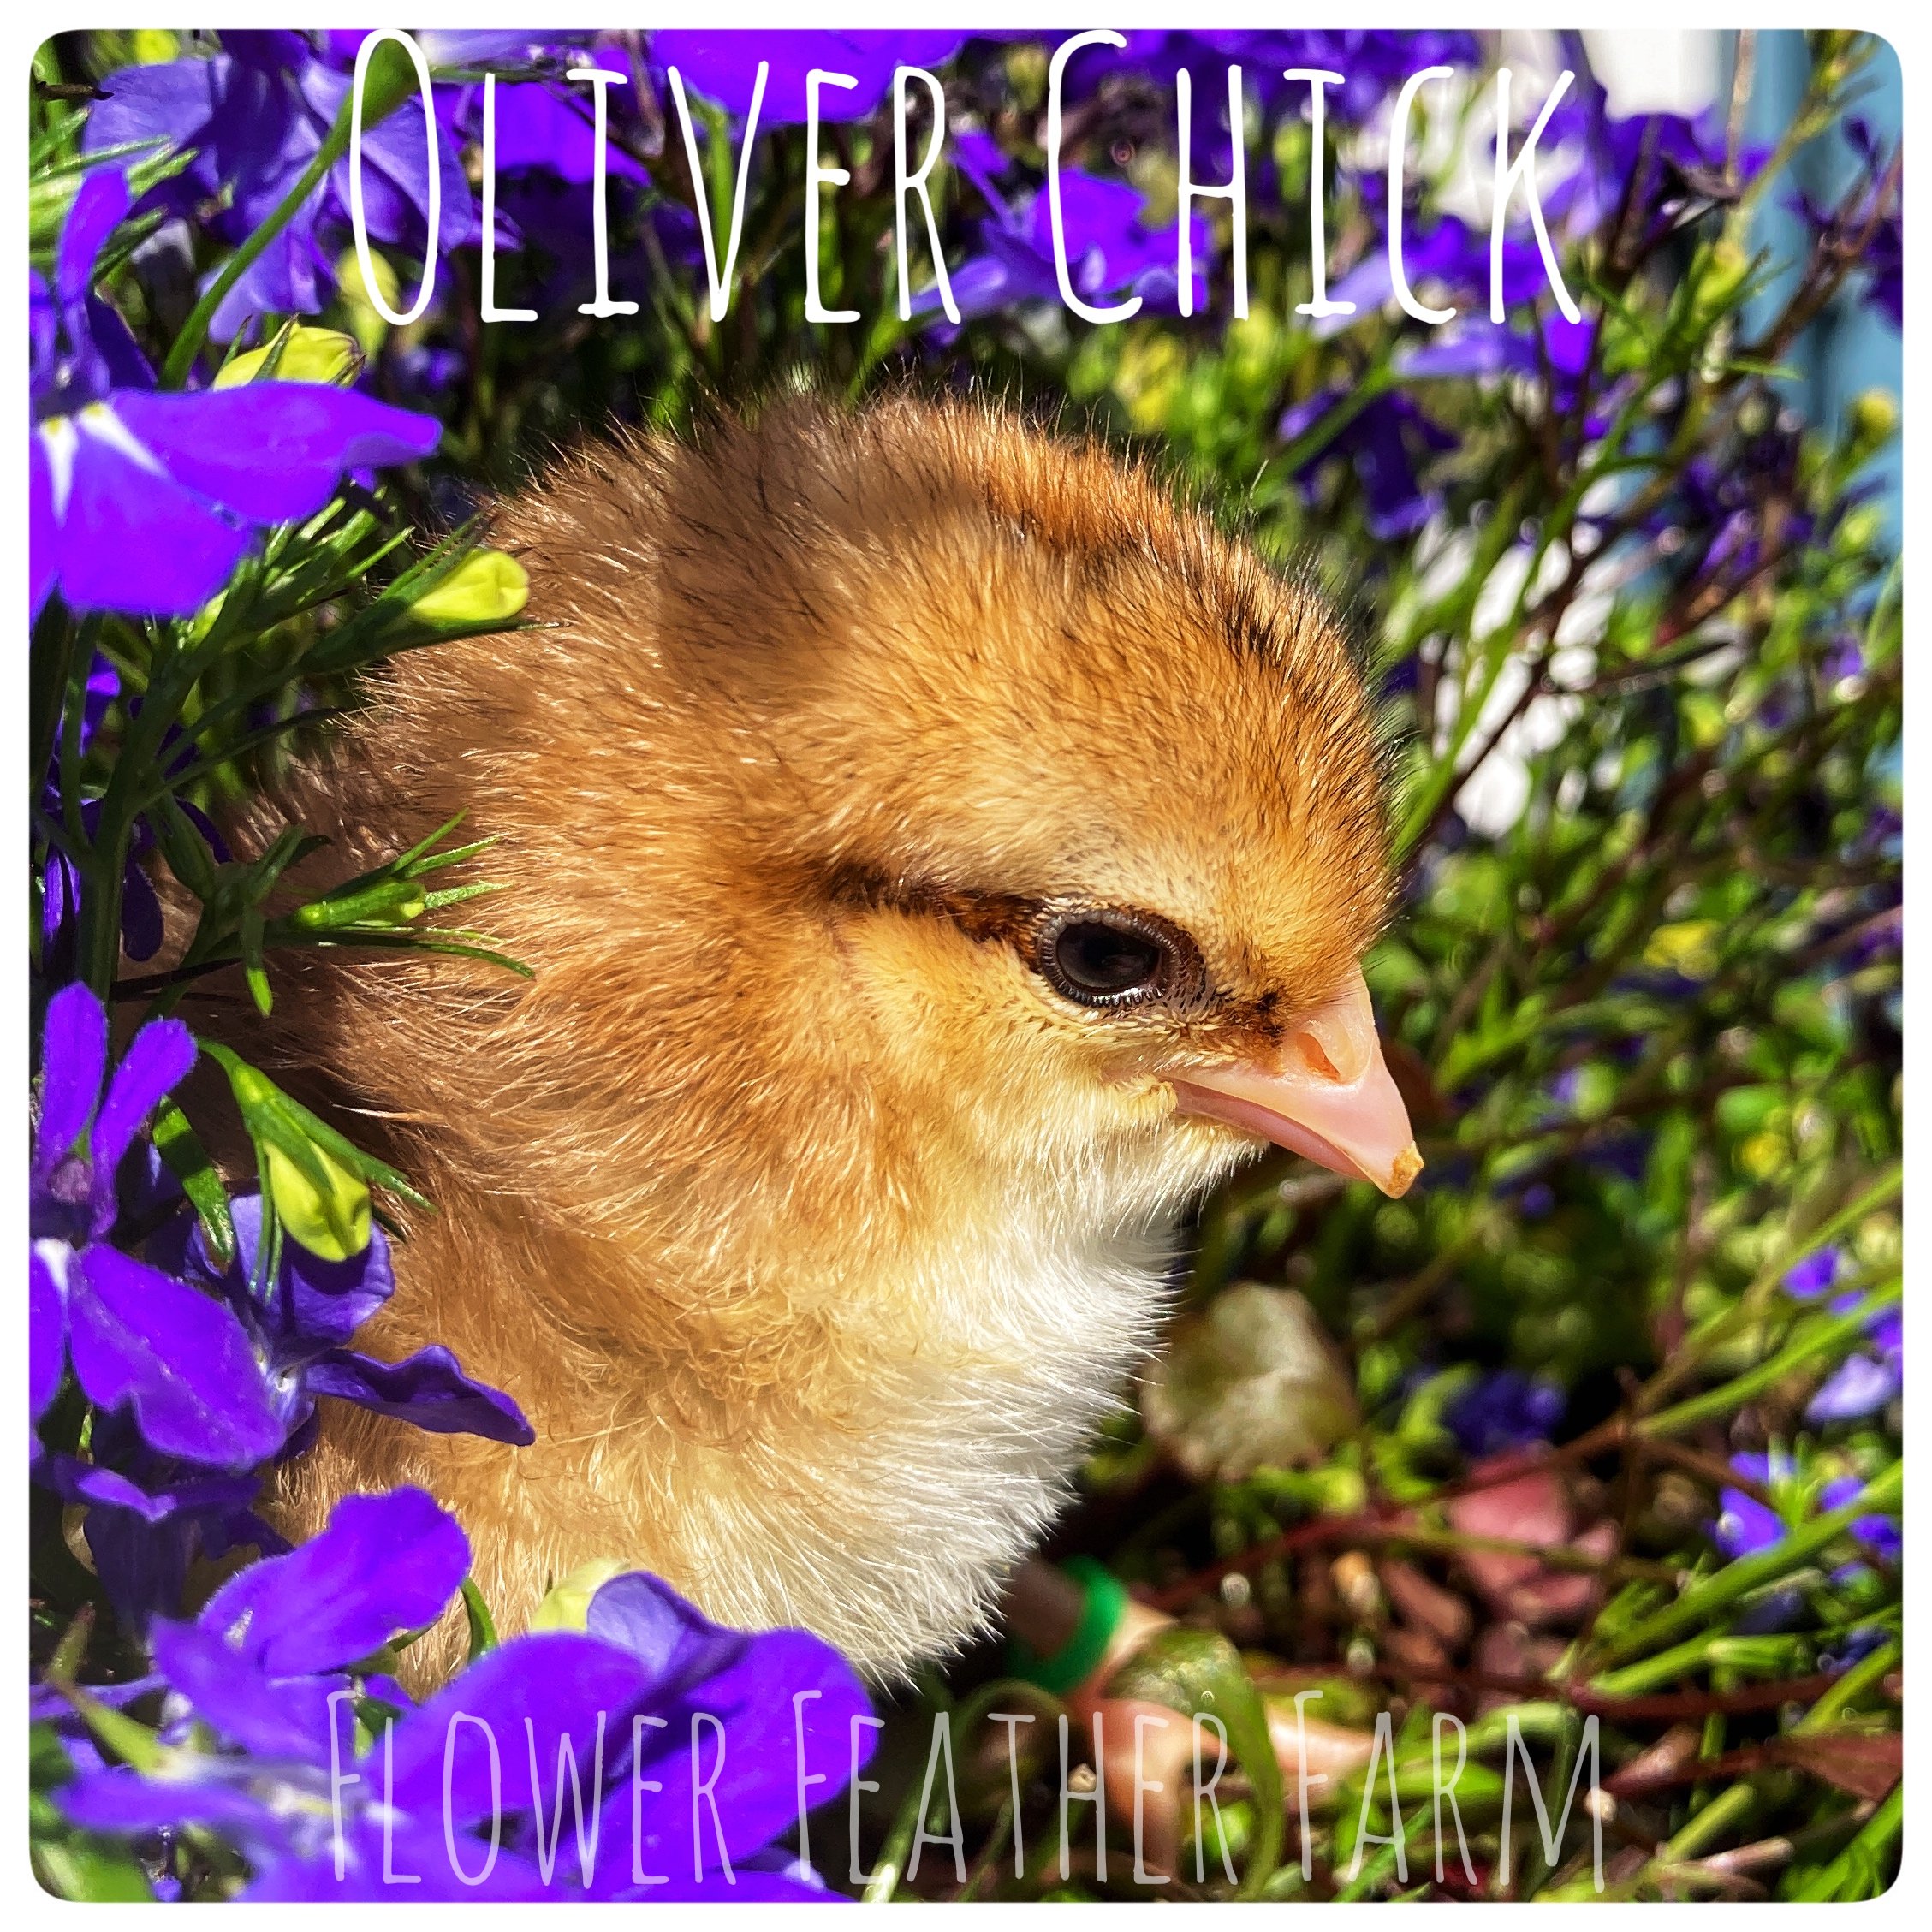 Olive Egger Chick at Flower Feather Farm, Specialty Chicks and Dahlia Tubers 